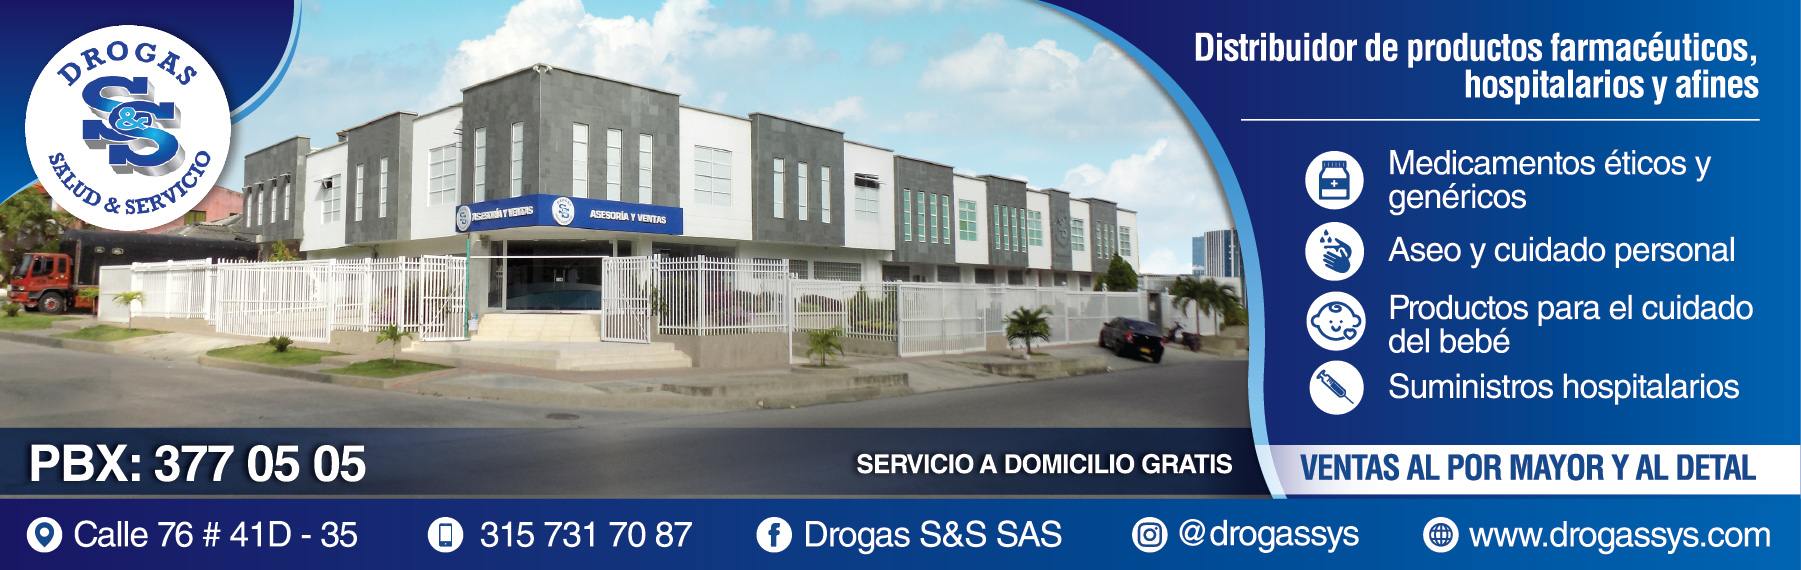 DROGAS SYS